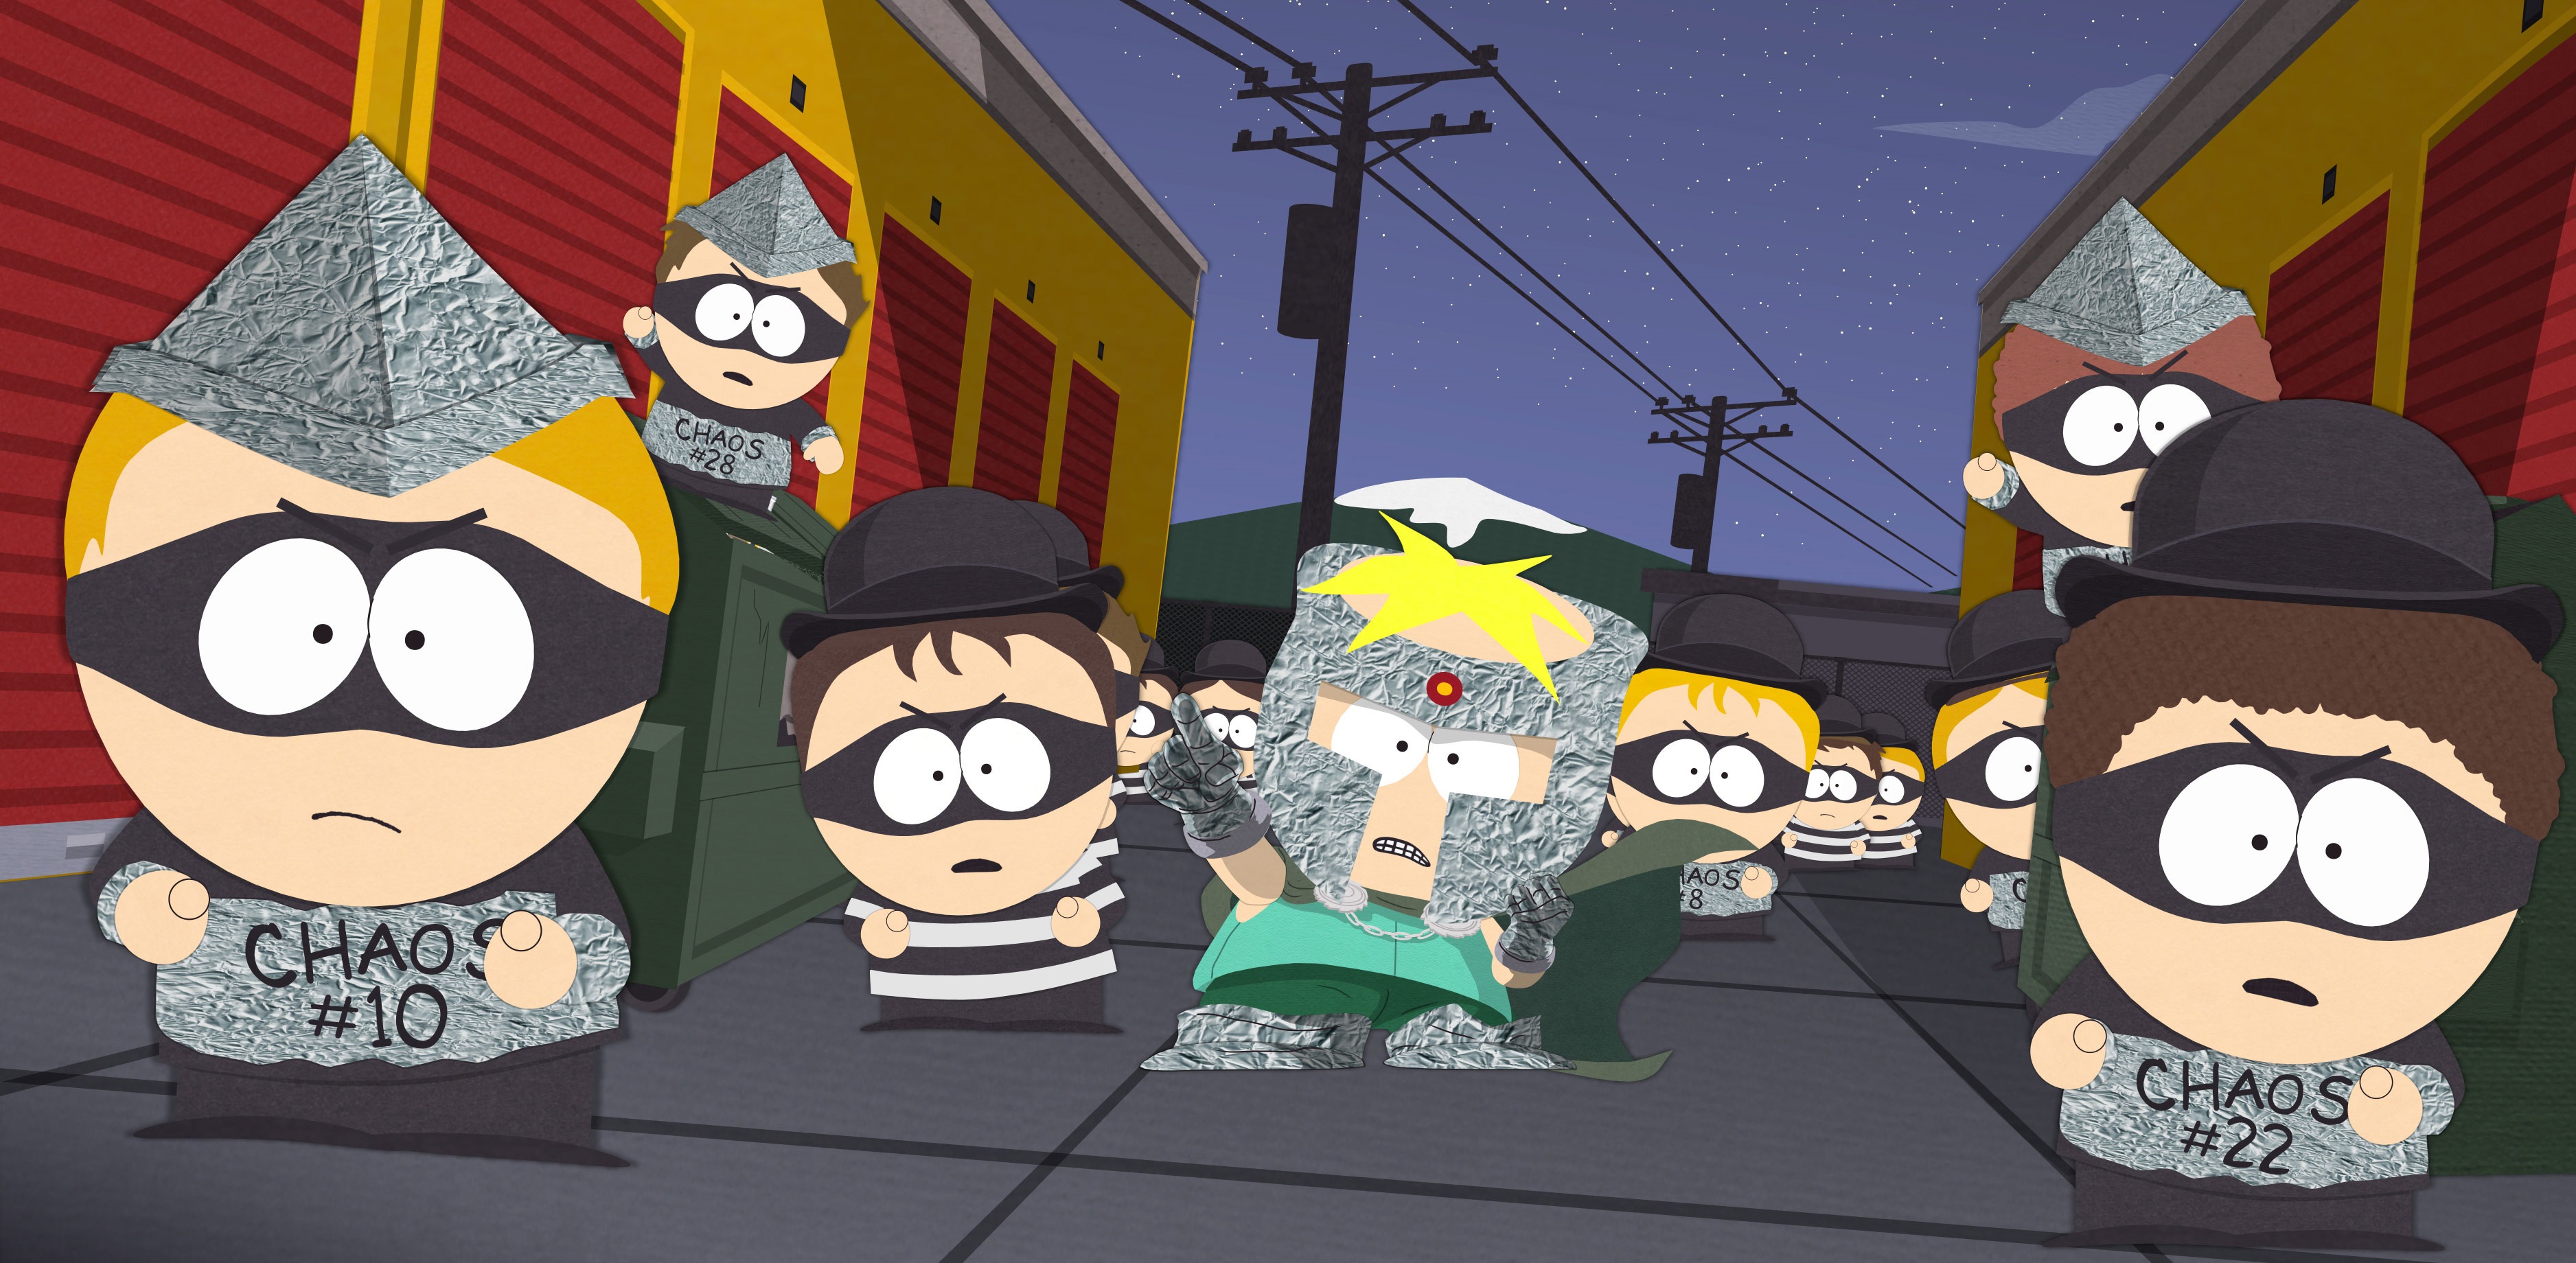 South Park The Fractured But Whole 3752x1840